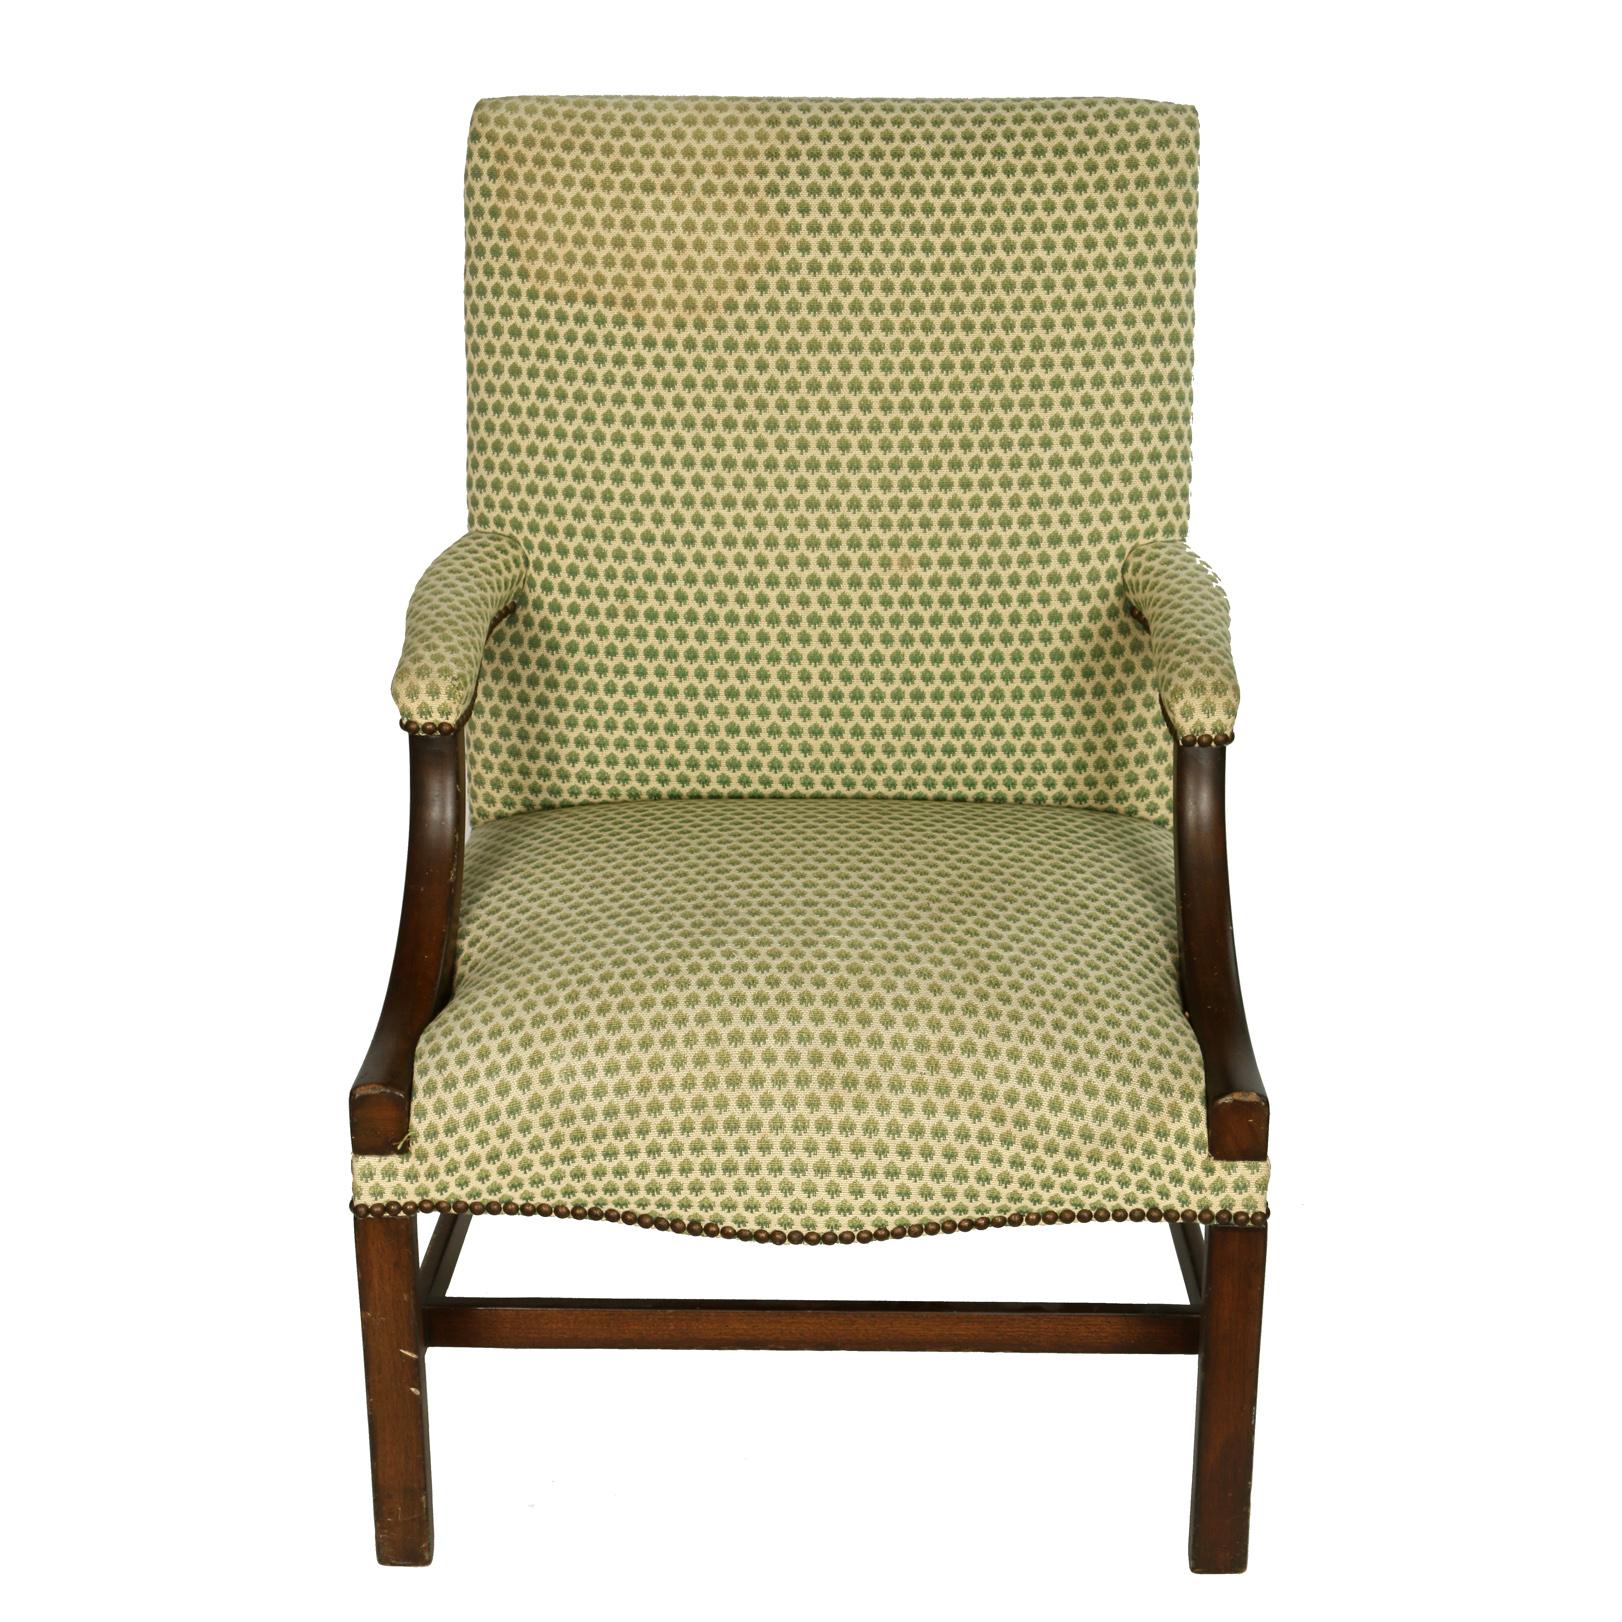 20th Century English George III Style Upholstered Armchair For Sale